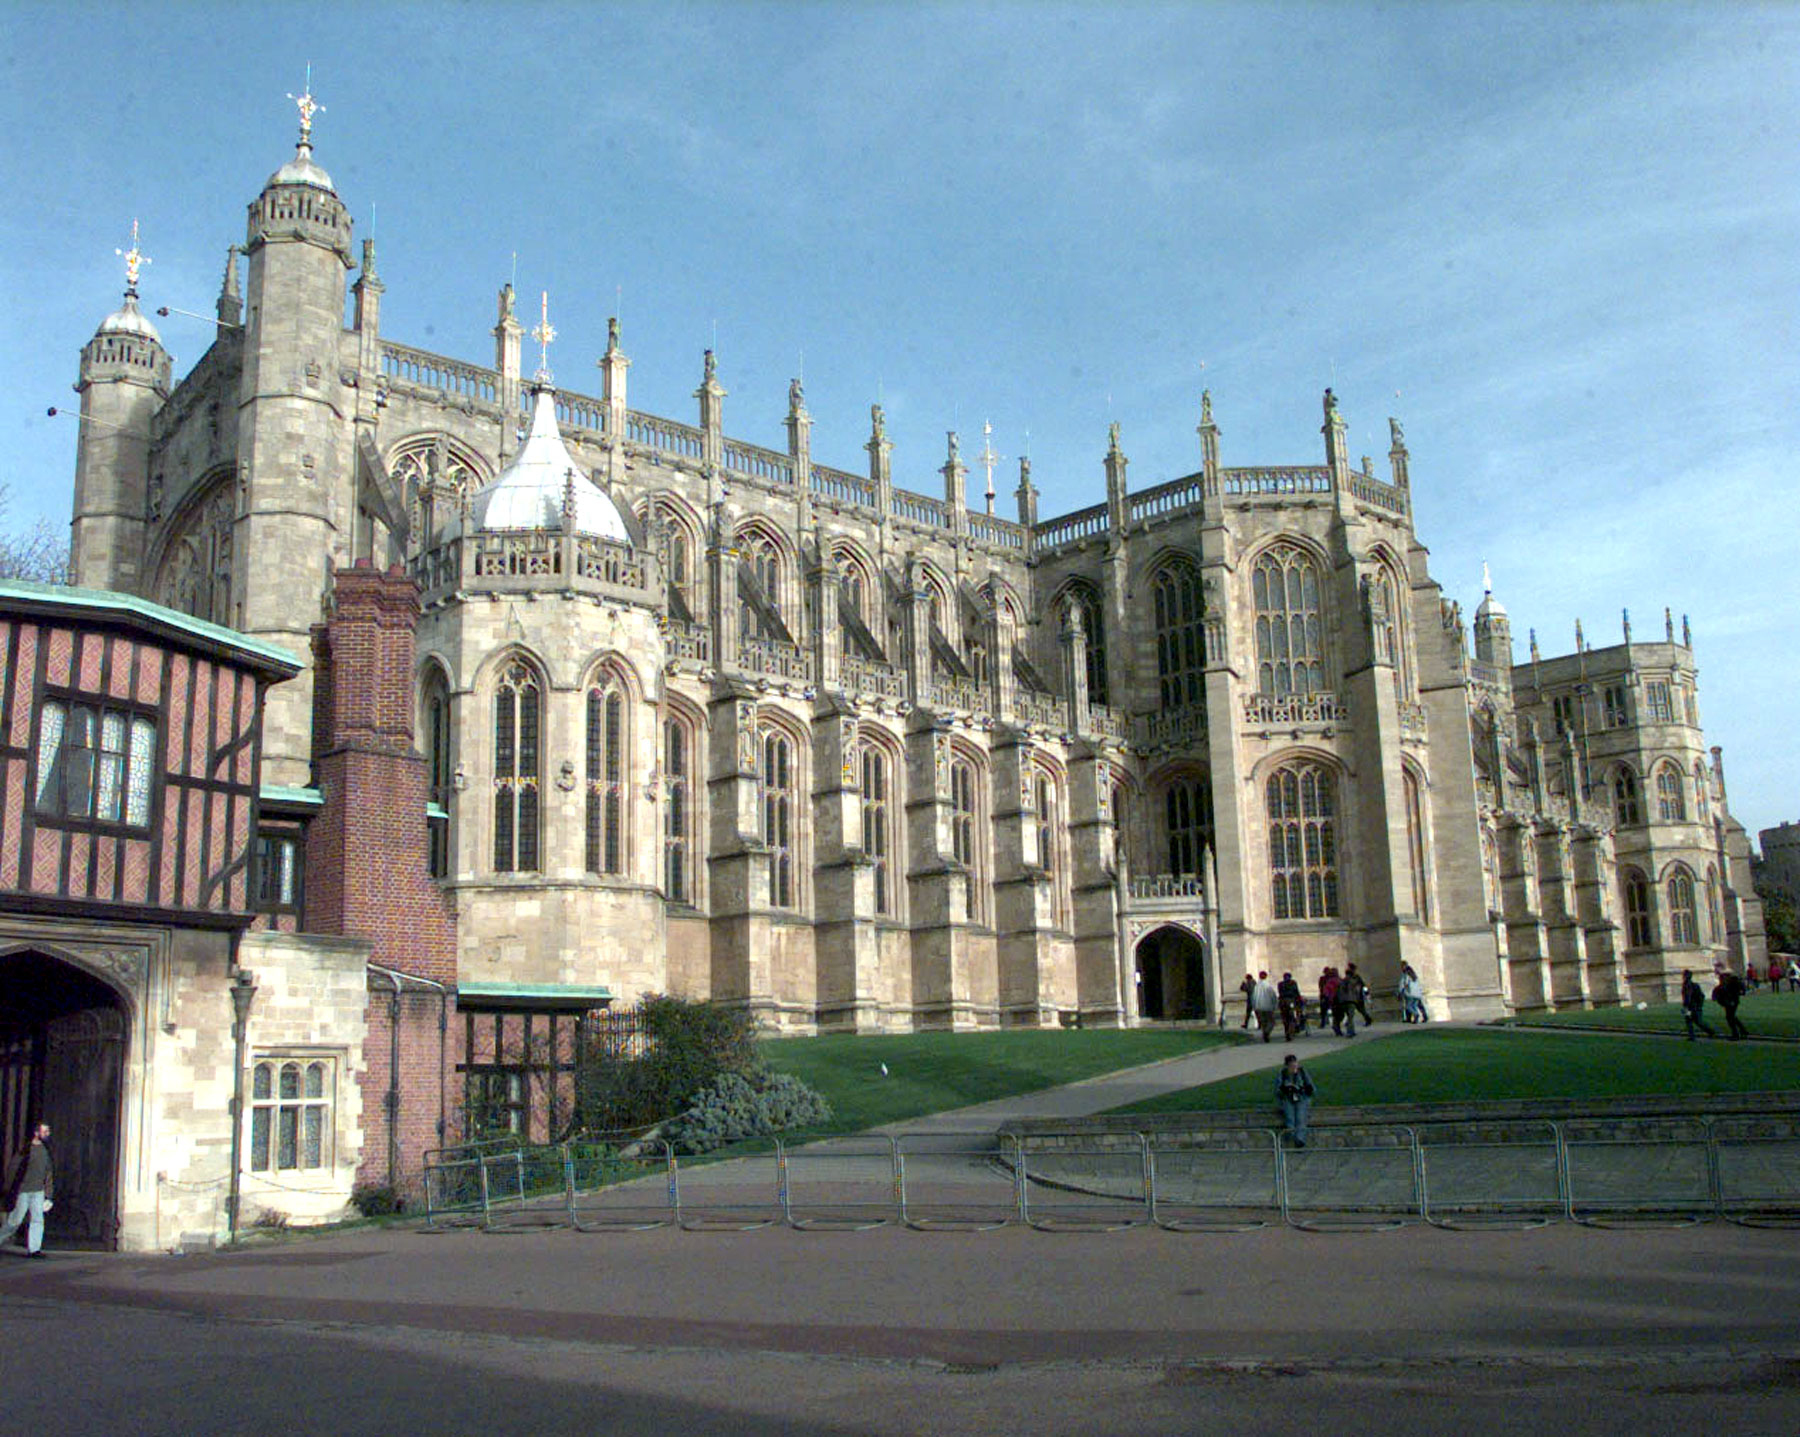 PHOTO: In this file photo dated June 1, 1999 shows St. George's Chapel at Windsor Castle in Berkshire, which has been chosen as the venue for the wedding of Prince Harry and Meghan Markle. 